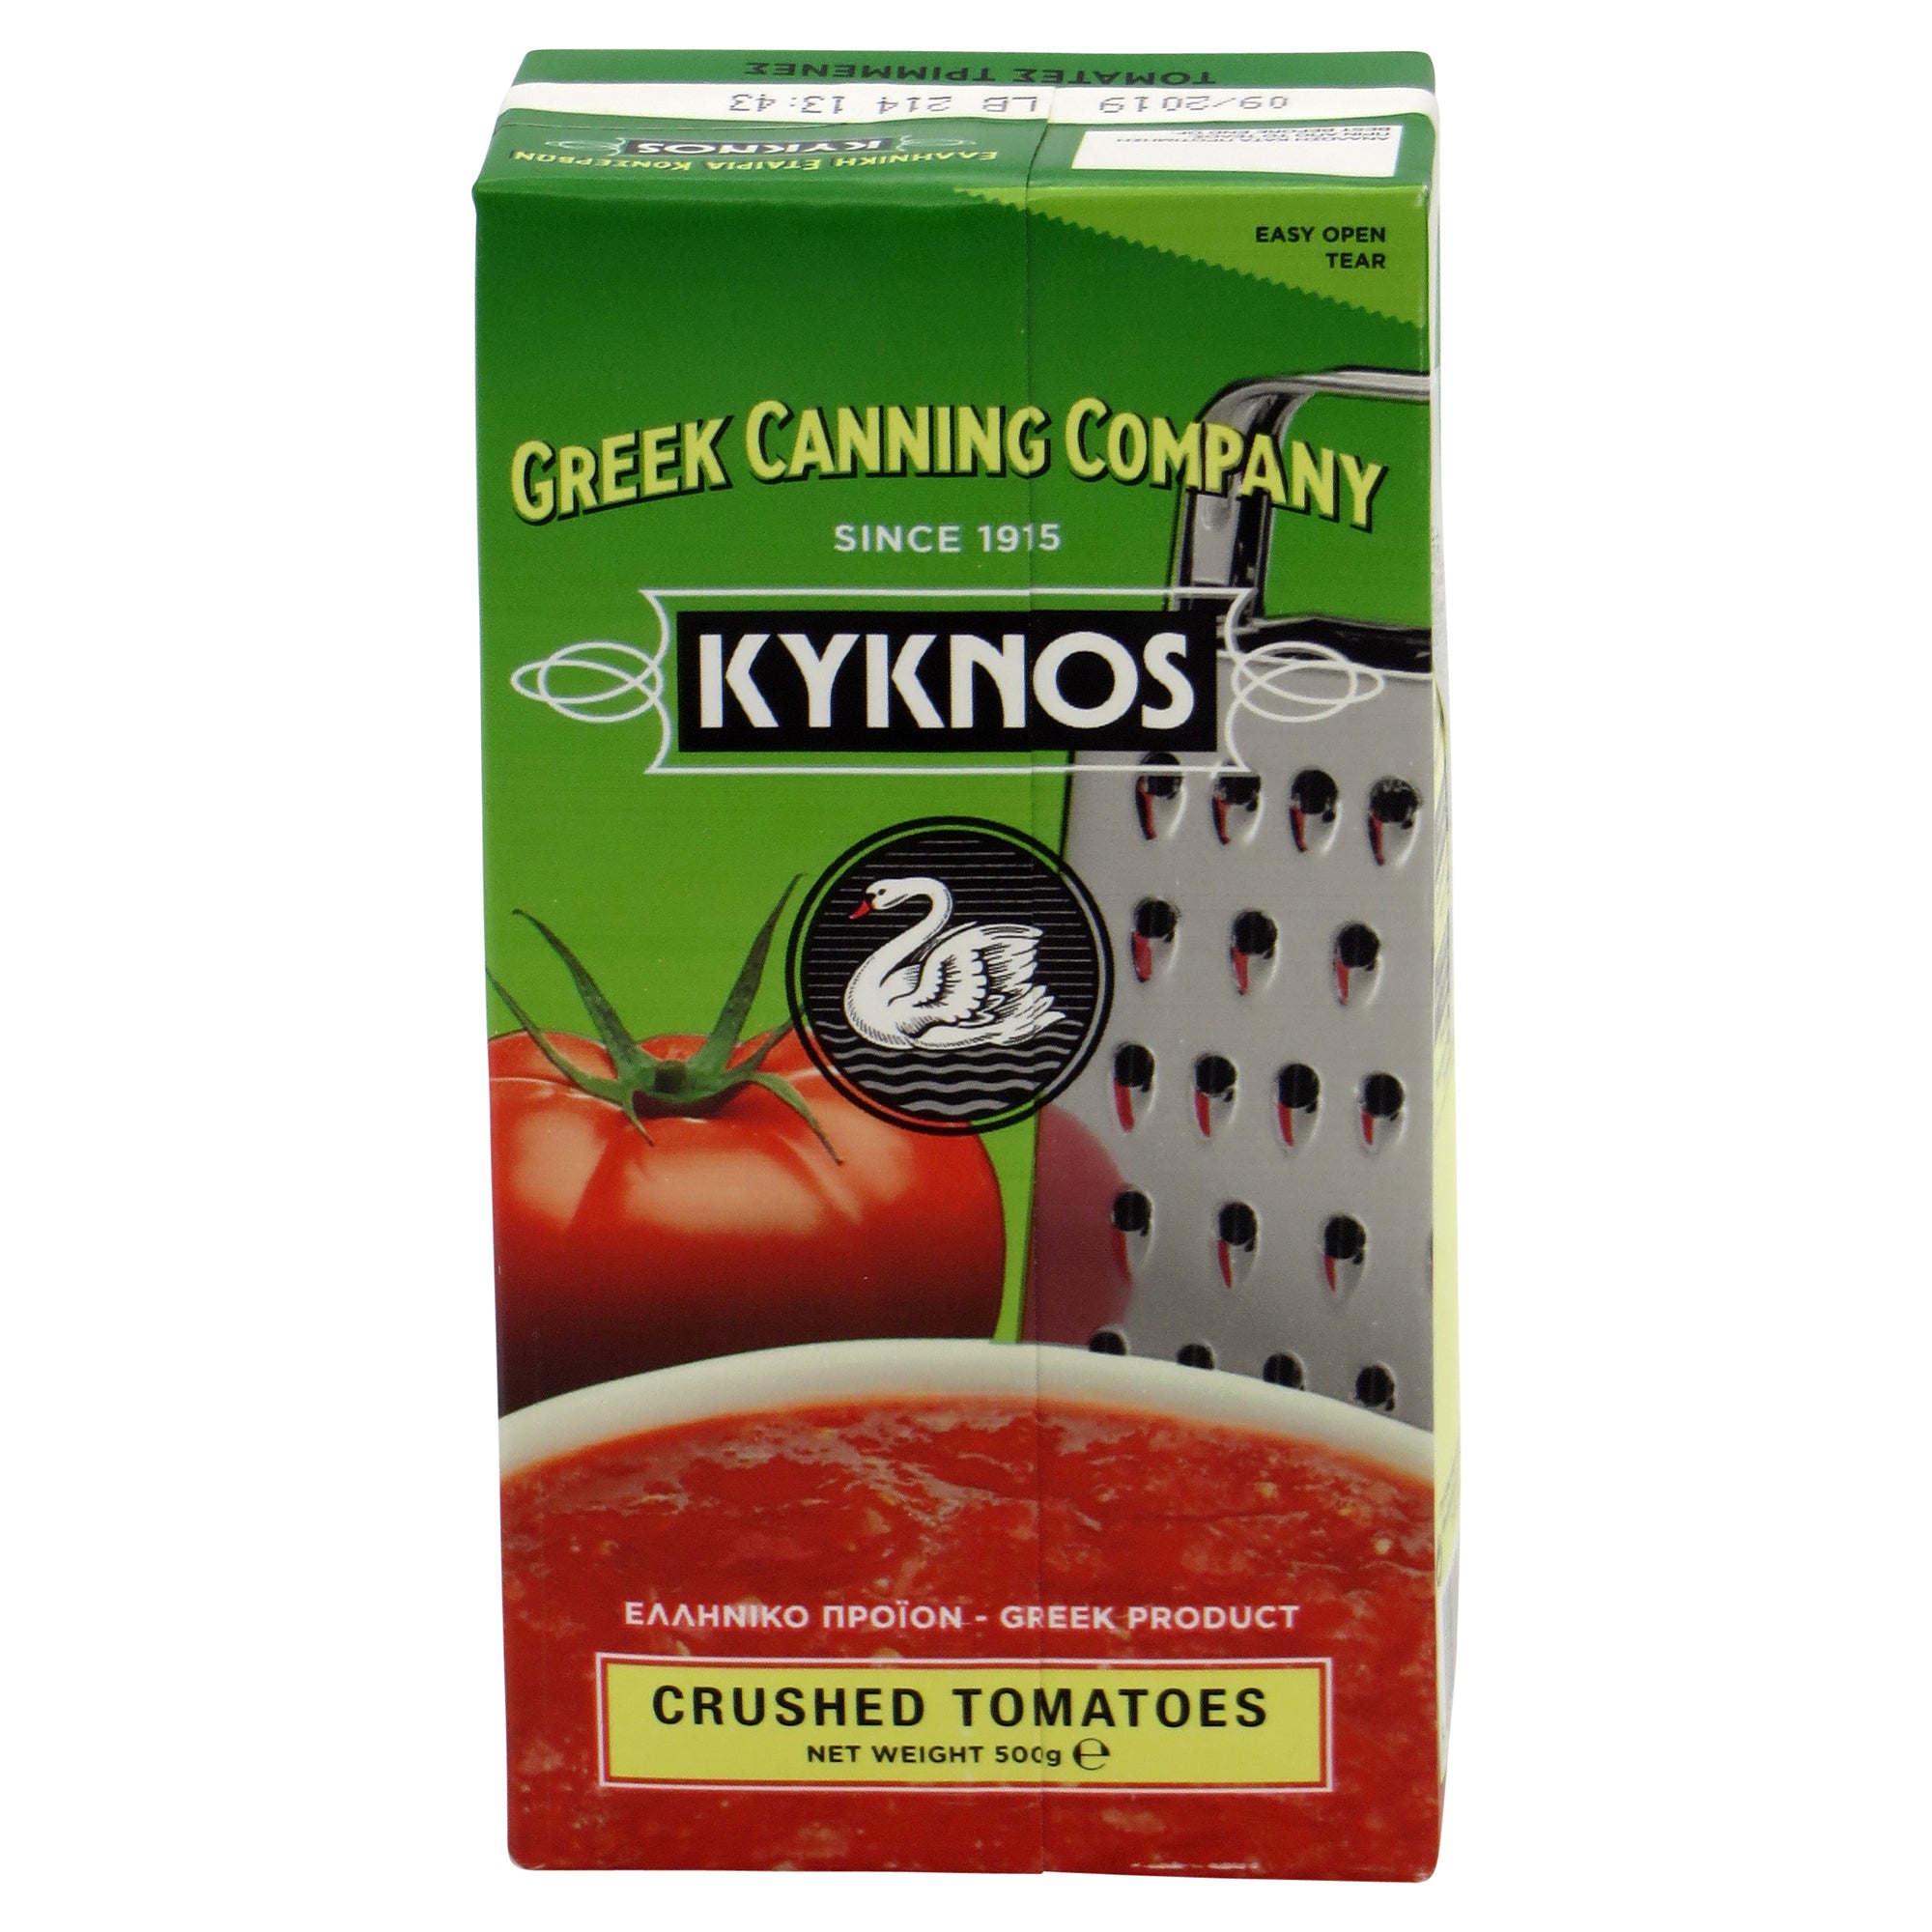 Crushed tomatoes in carton 500g